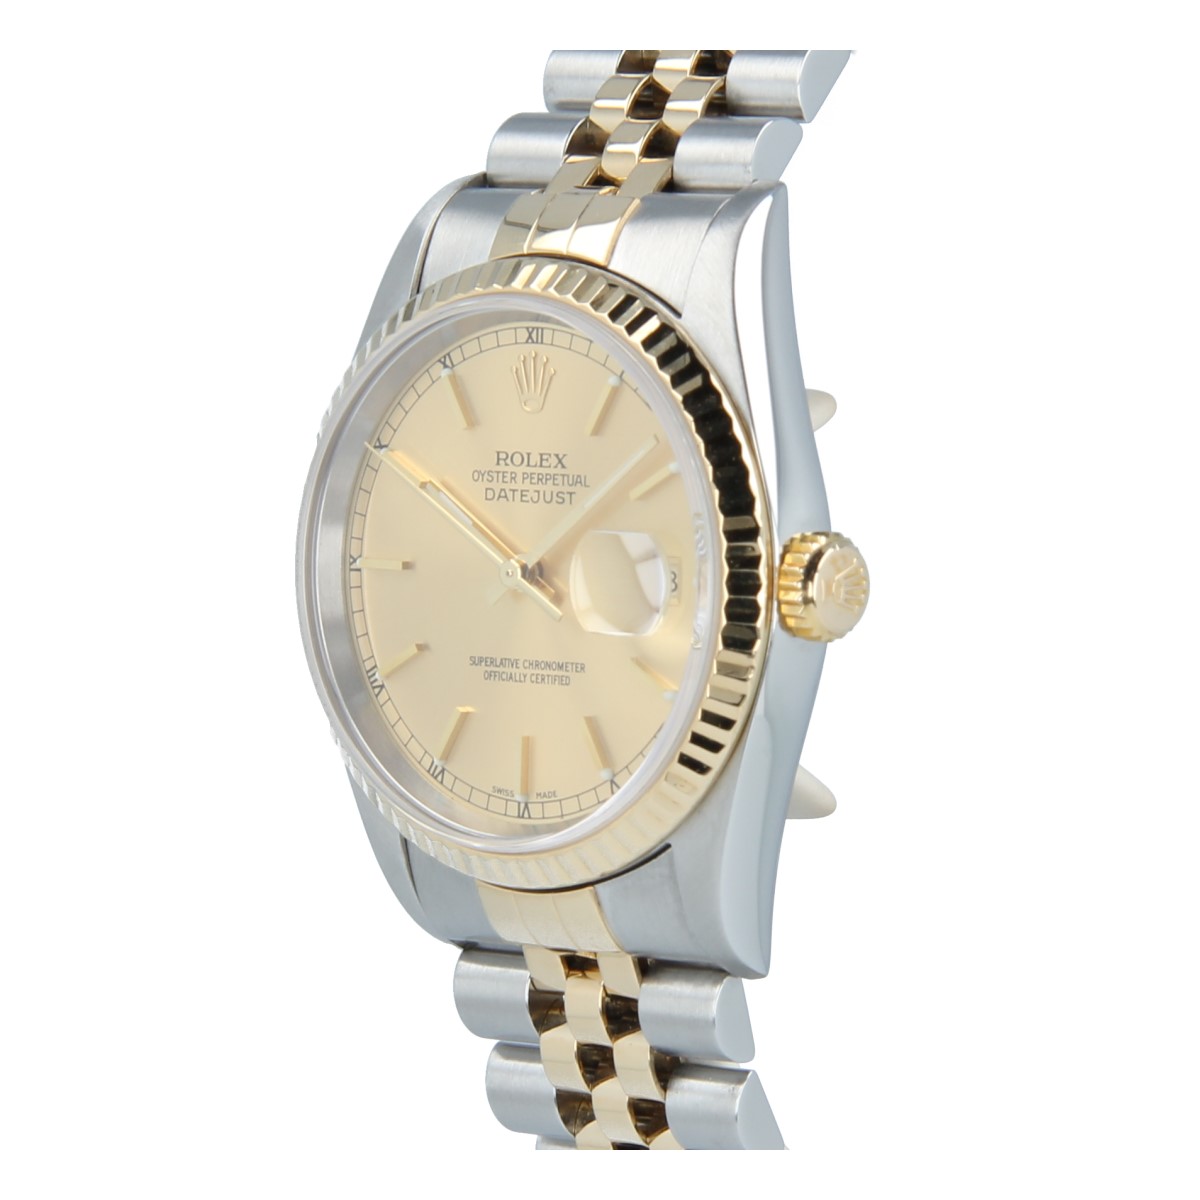 Rolex Datejust 36mm steel and gold 